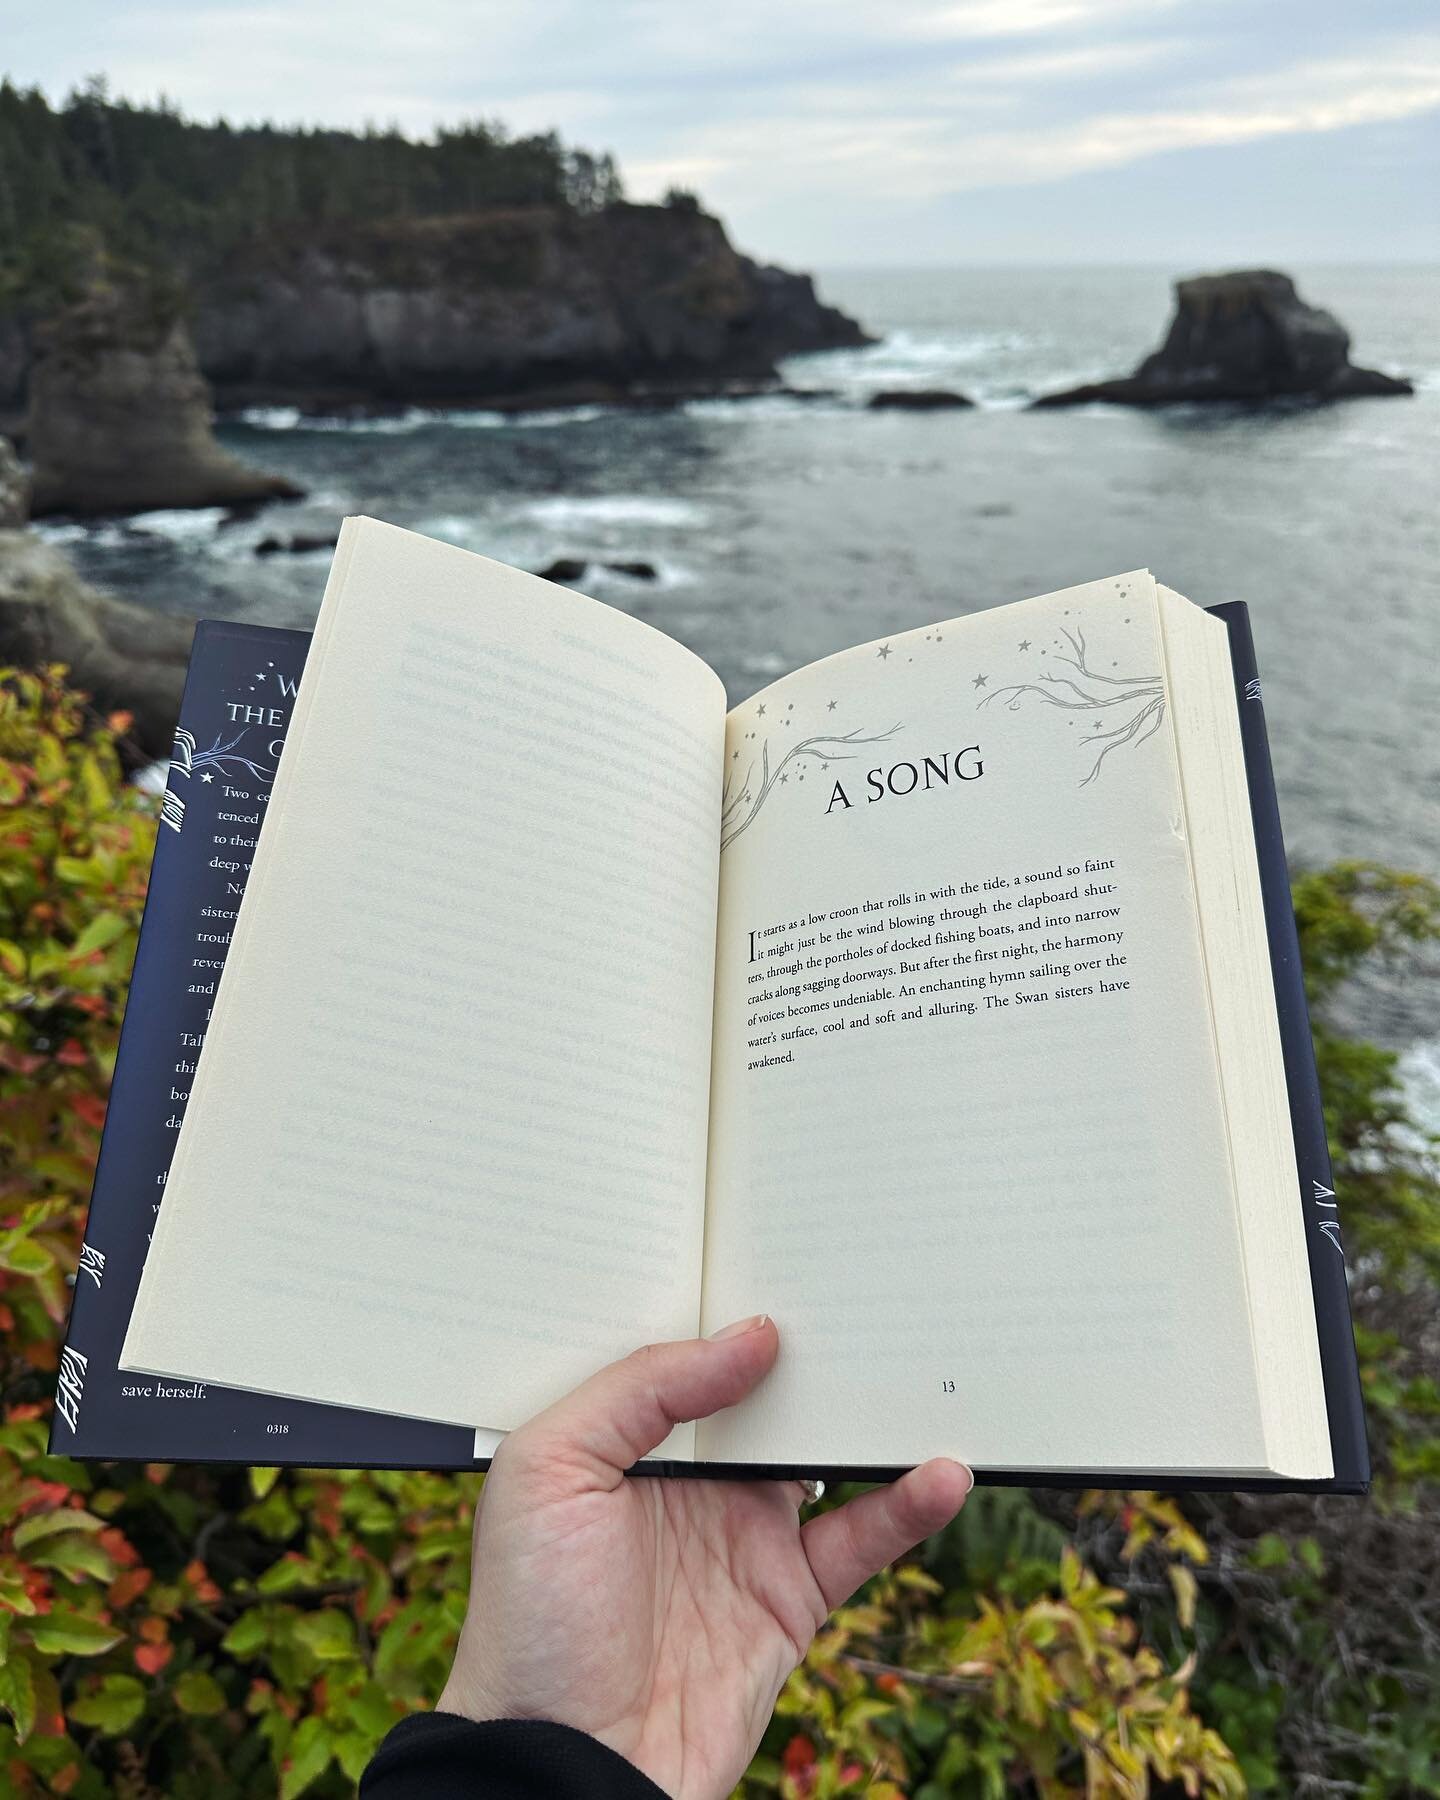 Do you love atmospheric books? Which are your favorite? 

Going to the Pacific Coast demanded that I bring #thewickeddeep 

I&rsquo;m getting to this place where the story setting is as important as the characters. Hell&hellip; the plot even. *did I 